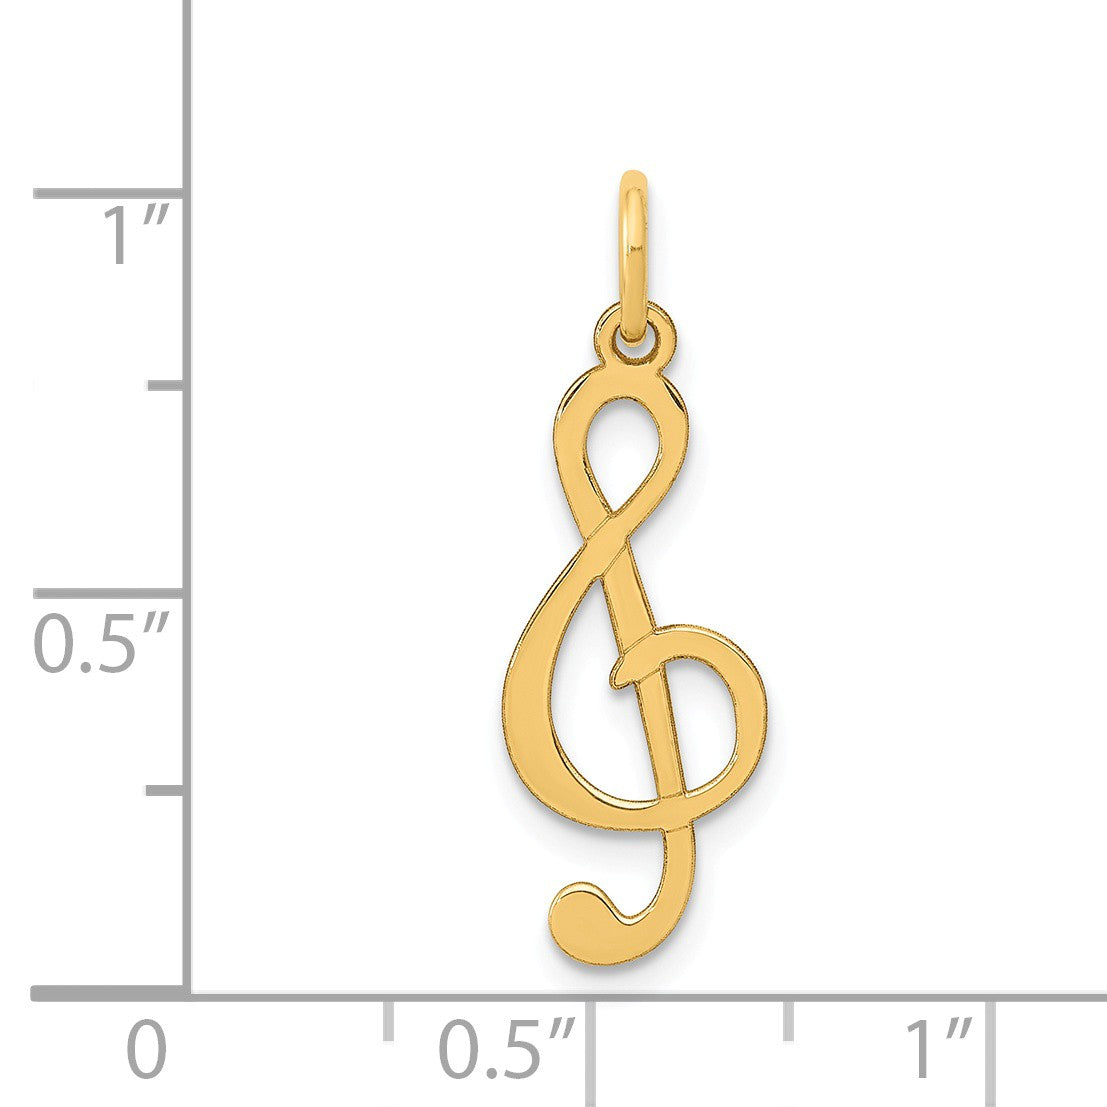 Black Bow Jewelry Company 14k Yellow Gold Textured Musical Note Necklace